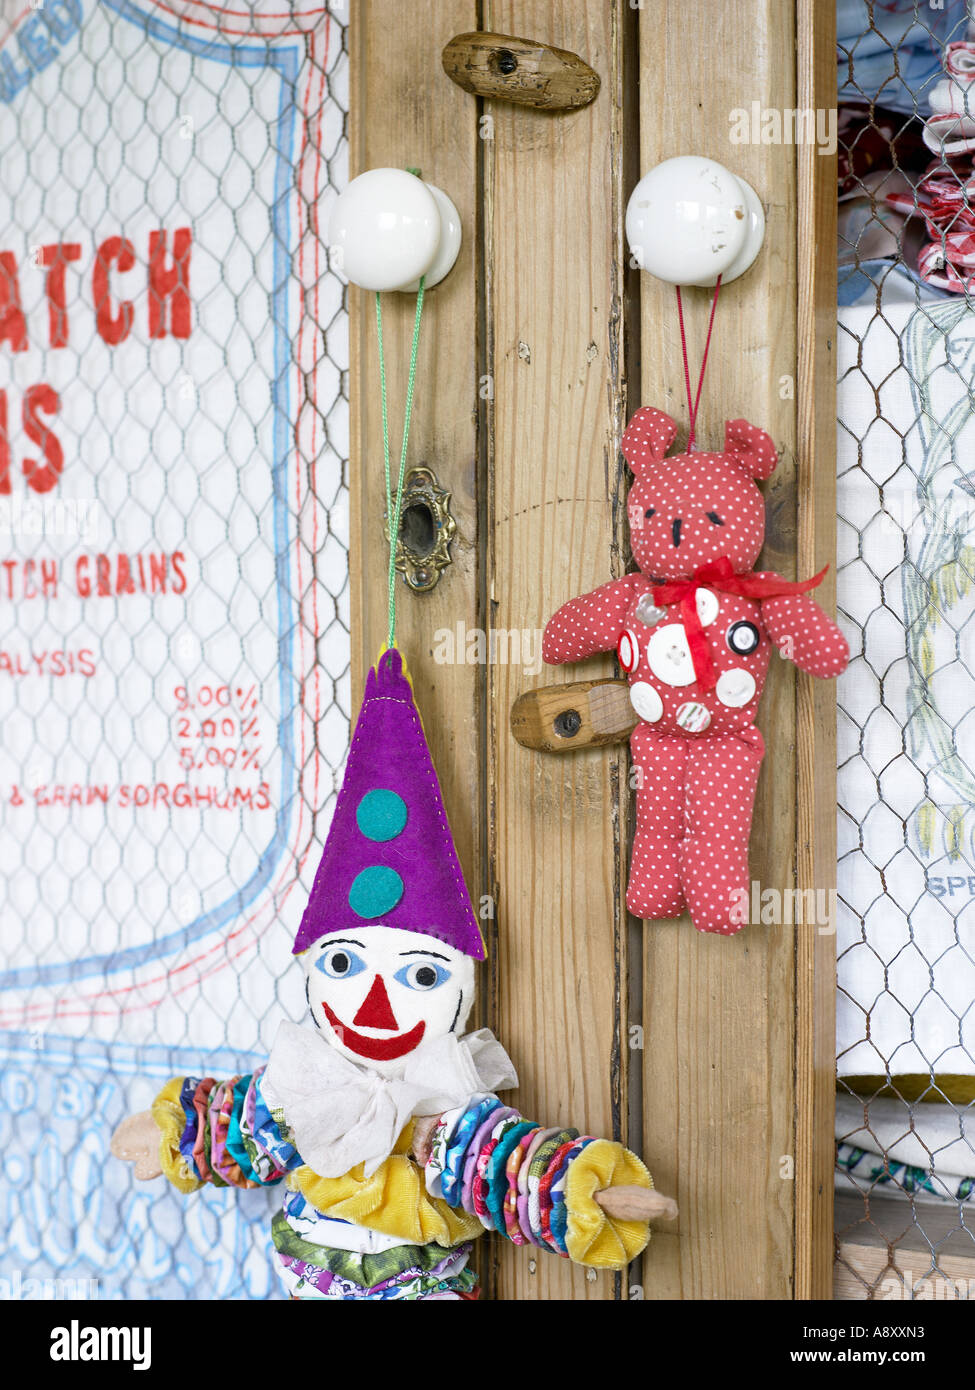 old rag clown and teddy bear with buttons hanging on a cupboard with chicken wire doors Stock Photo